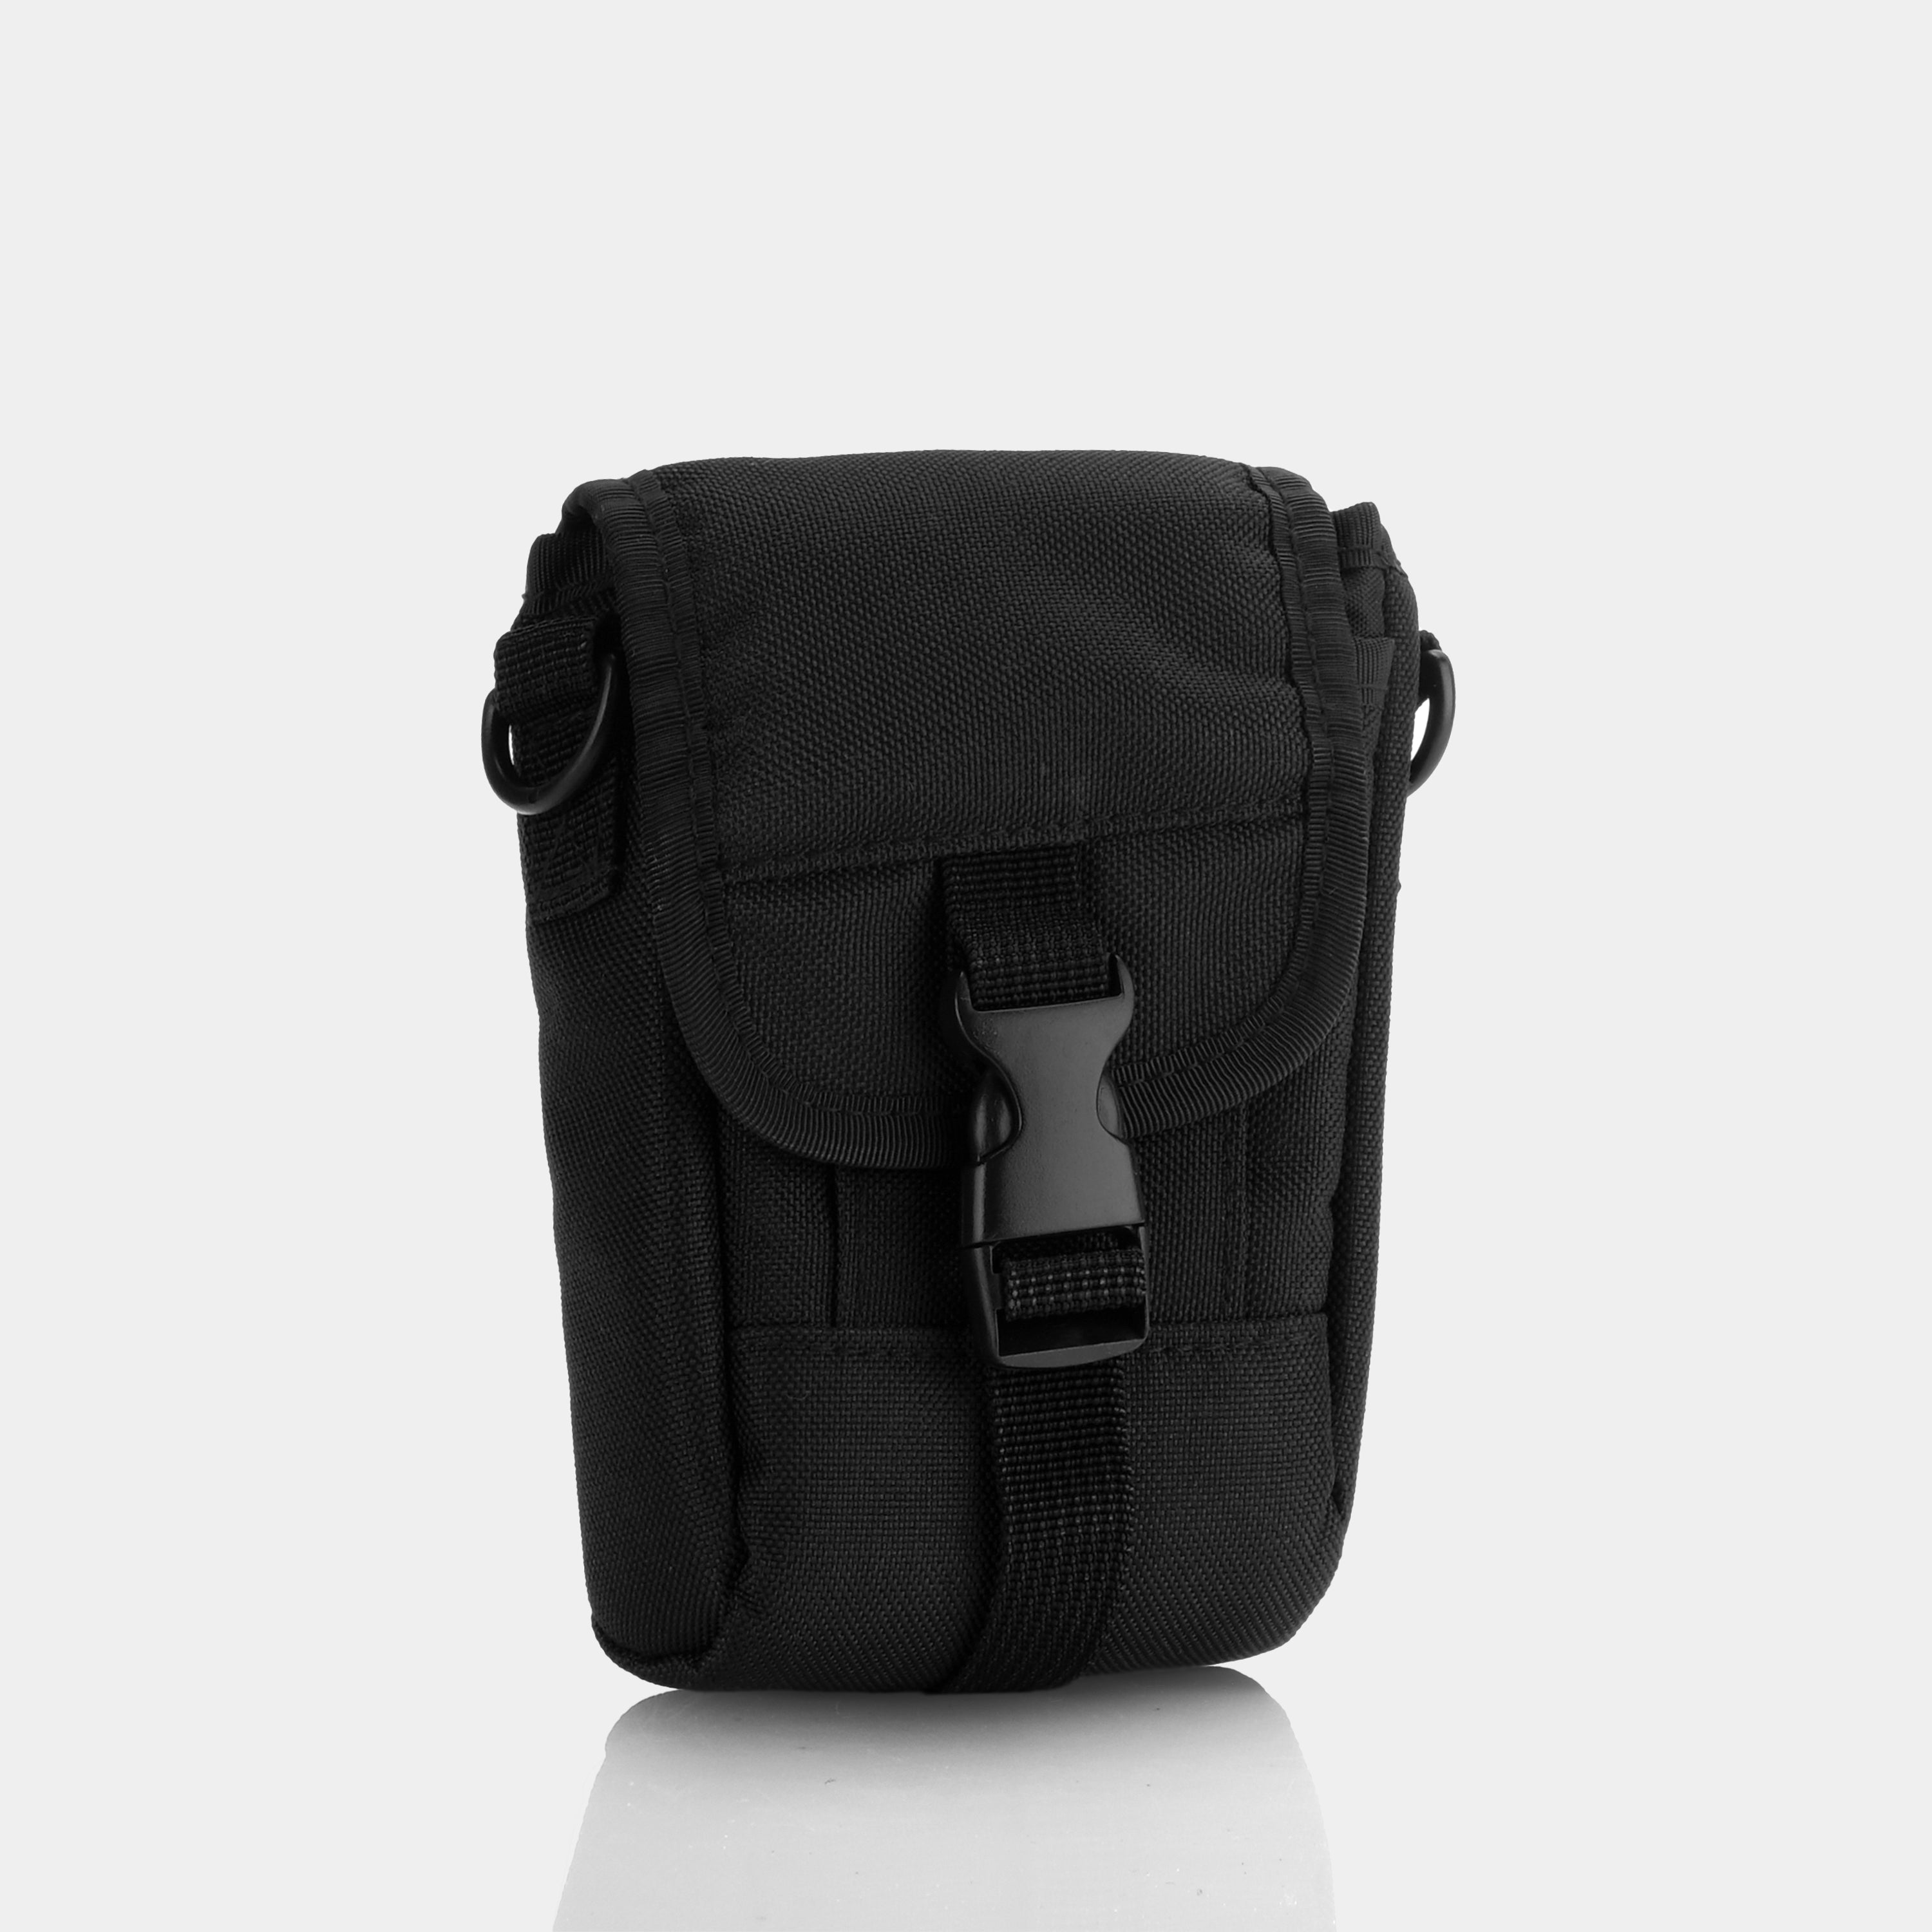 Black Canvas Point And Shoot Camera Case